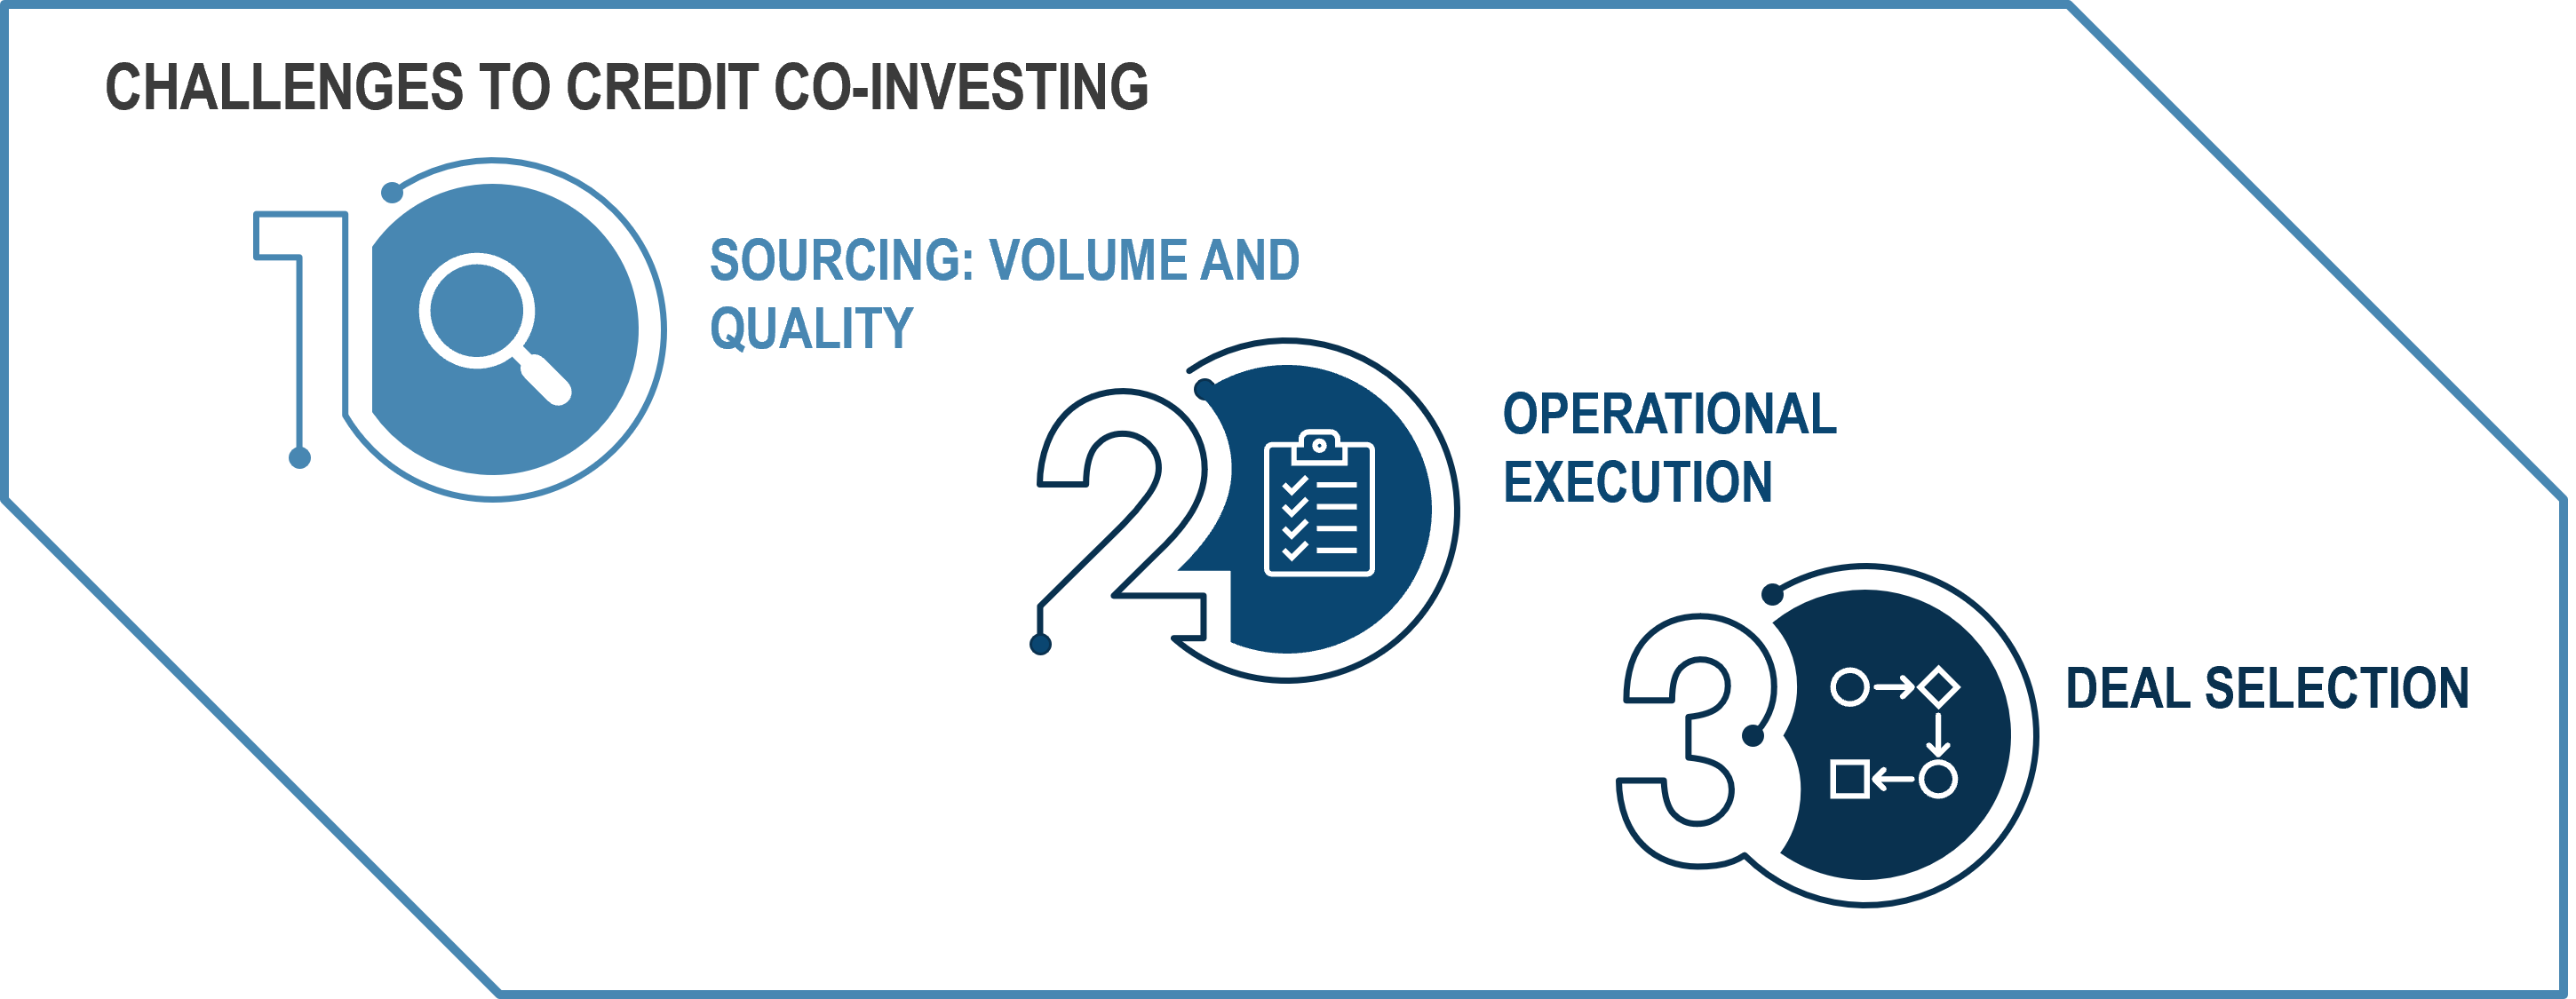 Challenges to credit co investing including sourcing volume and quality, operational execution, and deal selection.